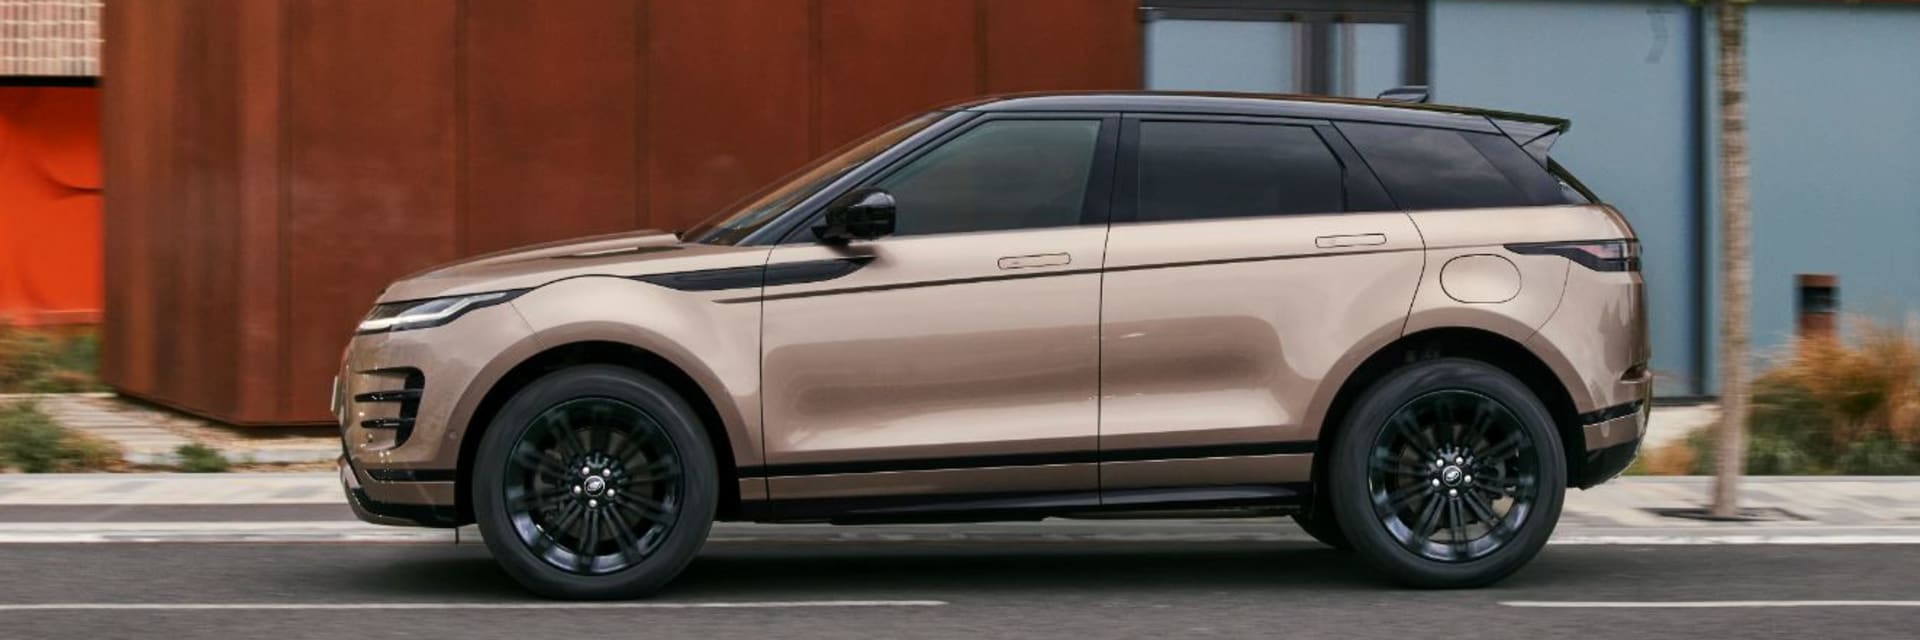 RANGE ROVER EVOQUE PERSONAL CONTRACT PURCHASE OFFER